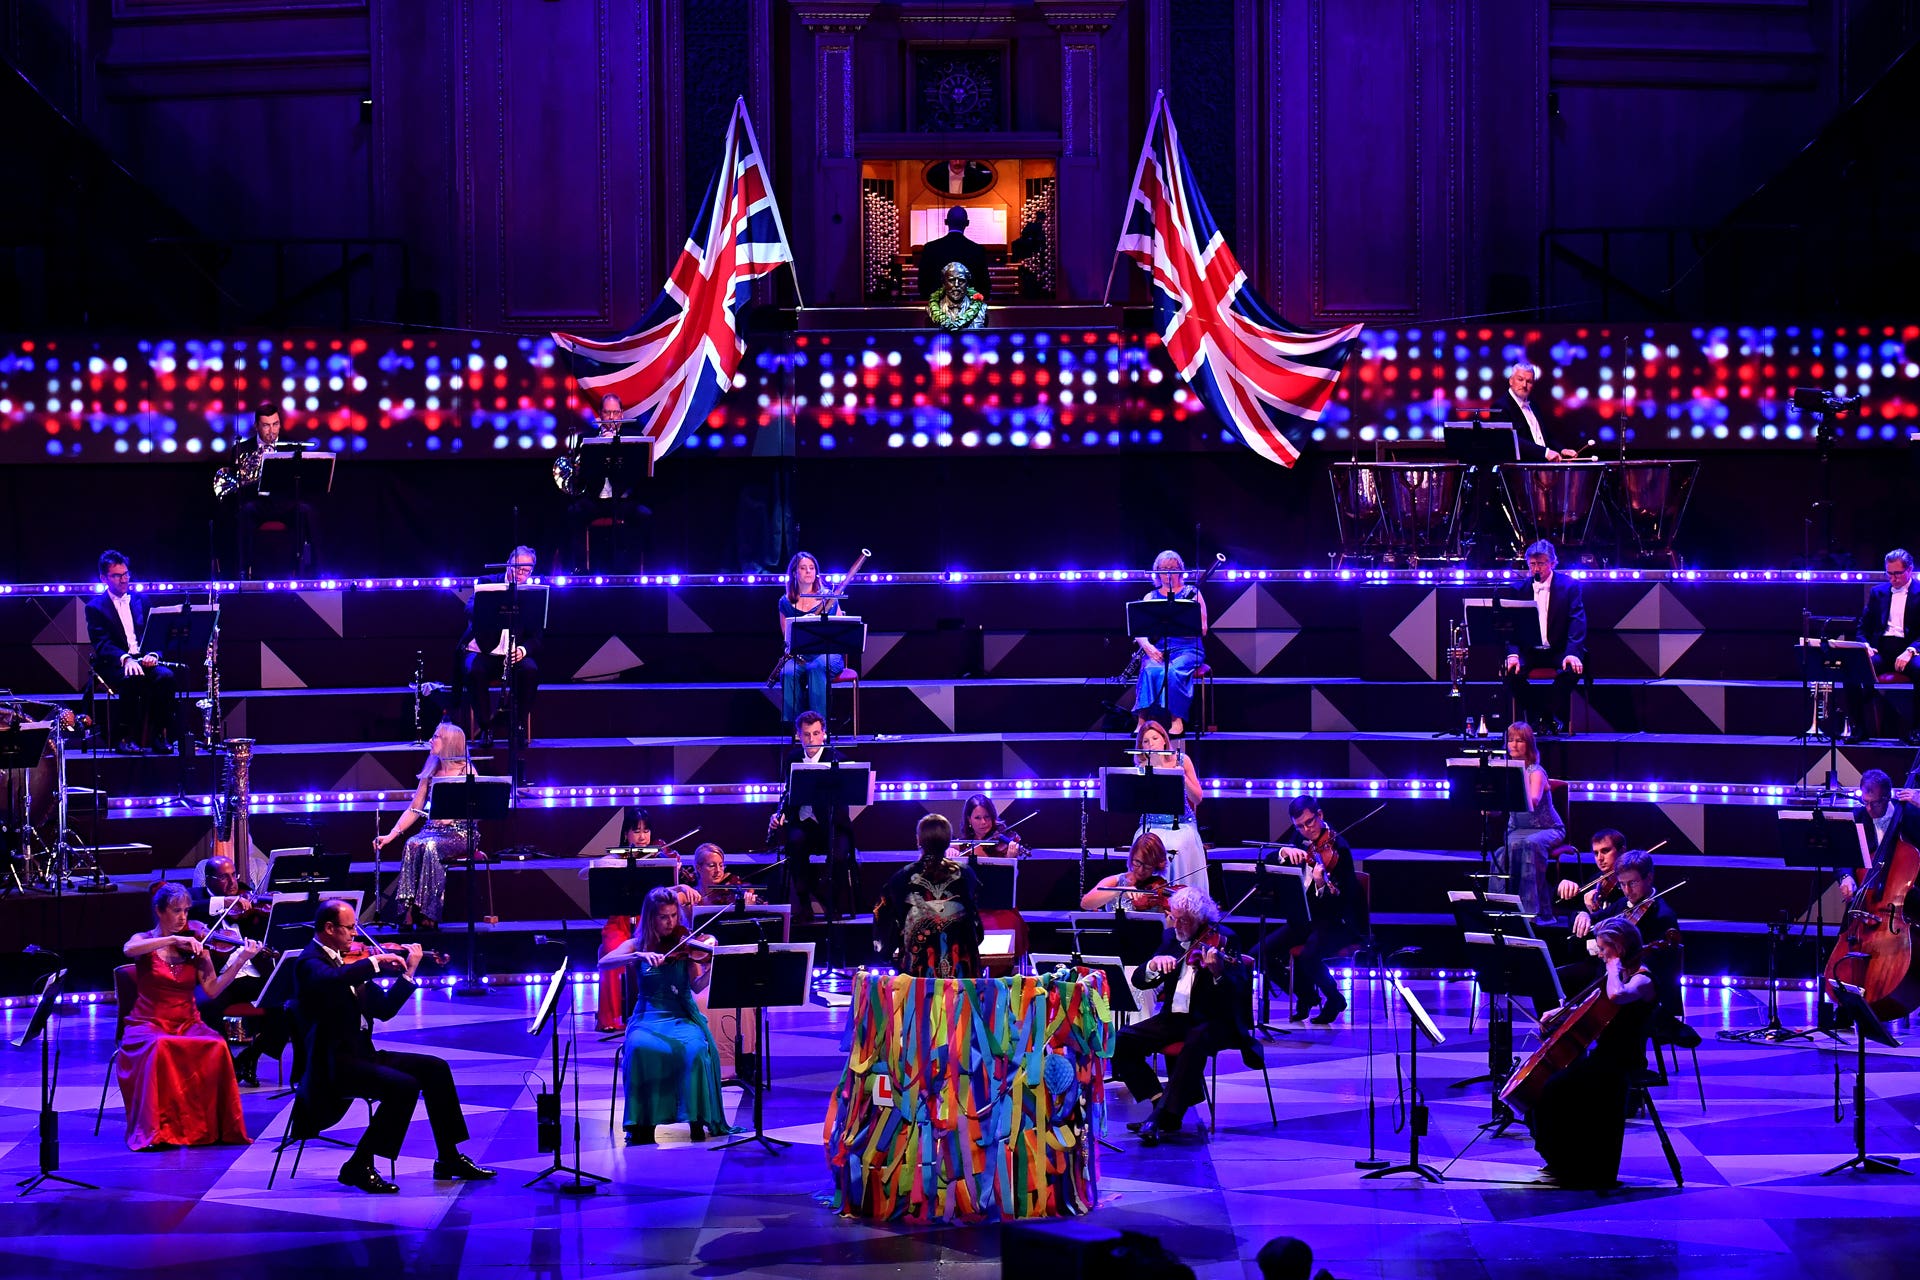 The Last Night of the Proms, conductor, Dalia Stasevska with a reduced orchestra of 65 instead of the usual 300 who performed live at the Royal Albert Hall